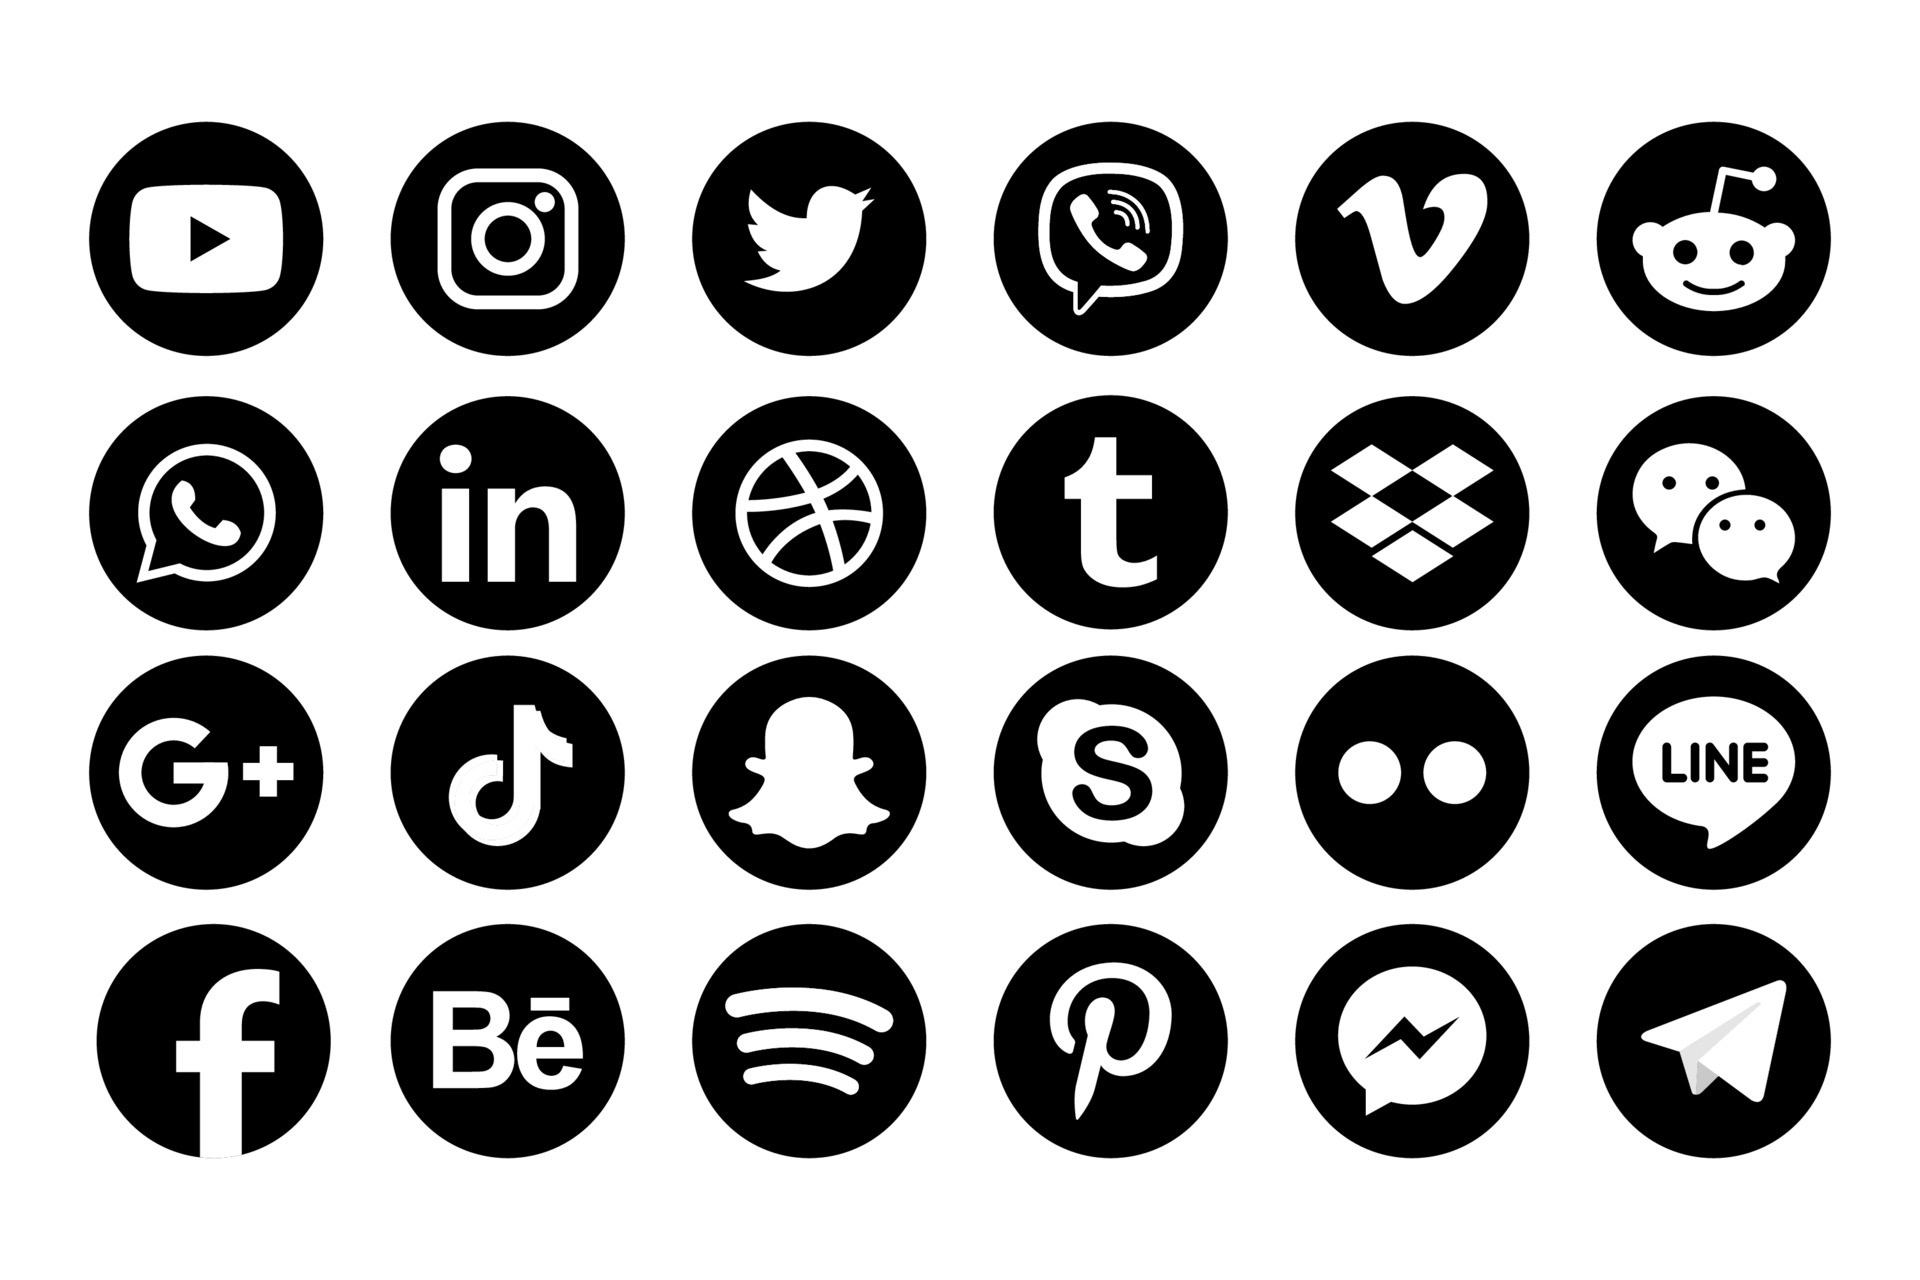 Facebook chat icons